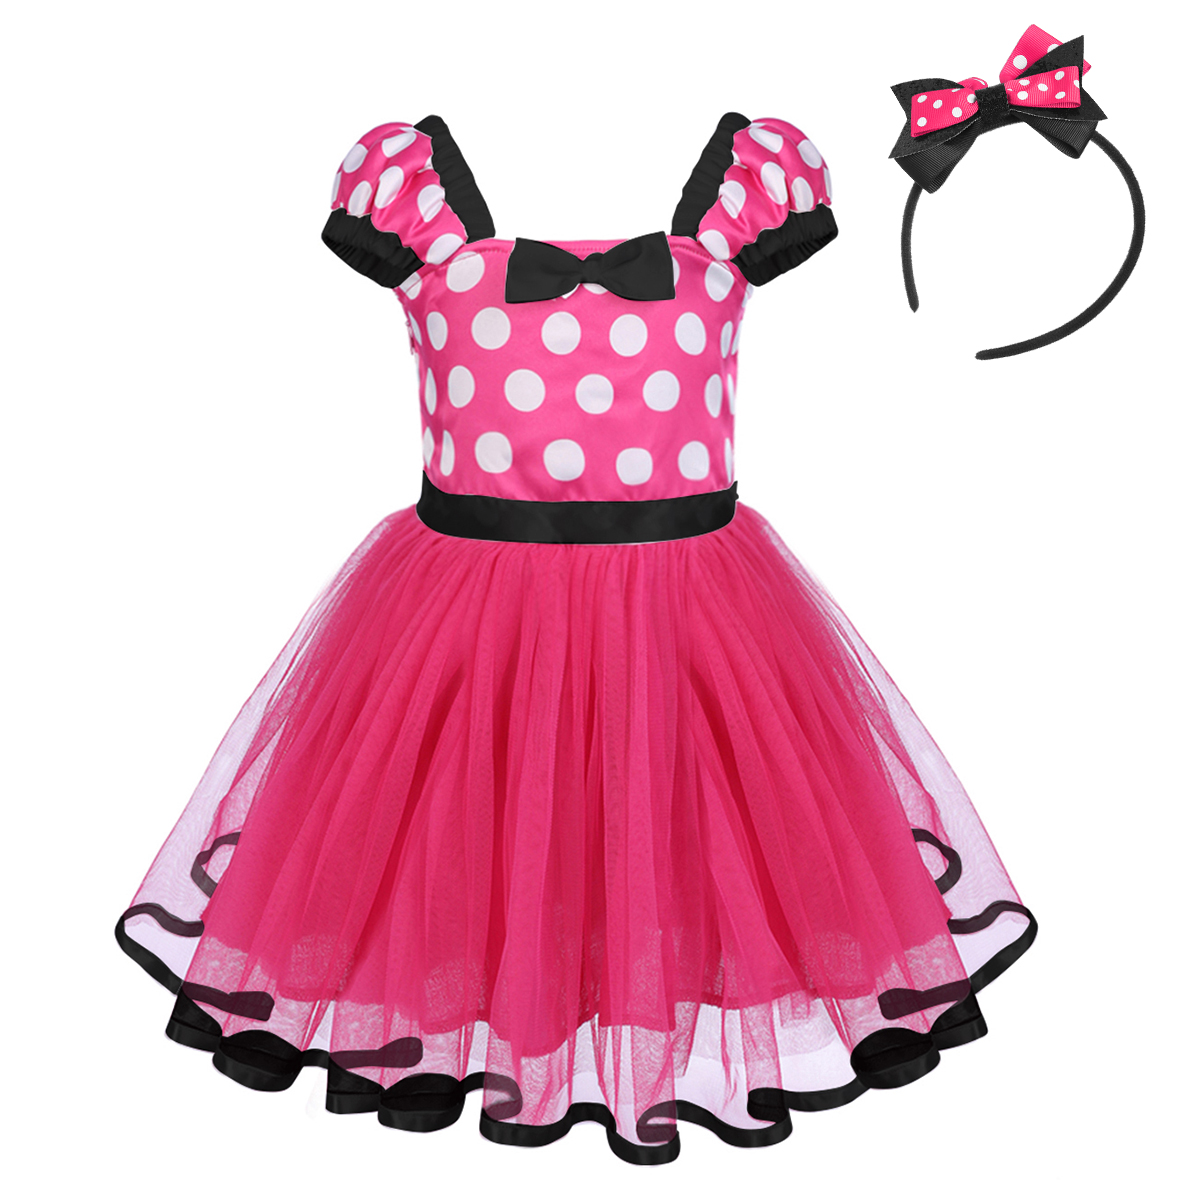 IBTOM CASTLE Toddler Girls Polka Dots Princess Party Cosplay Pageant Fancy Dress up Birthday Tutu Dress + Ears Headband Outfit Set 18-24 Months Hot Pink + Black - image 2 of 6